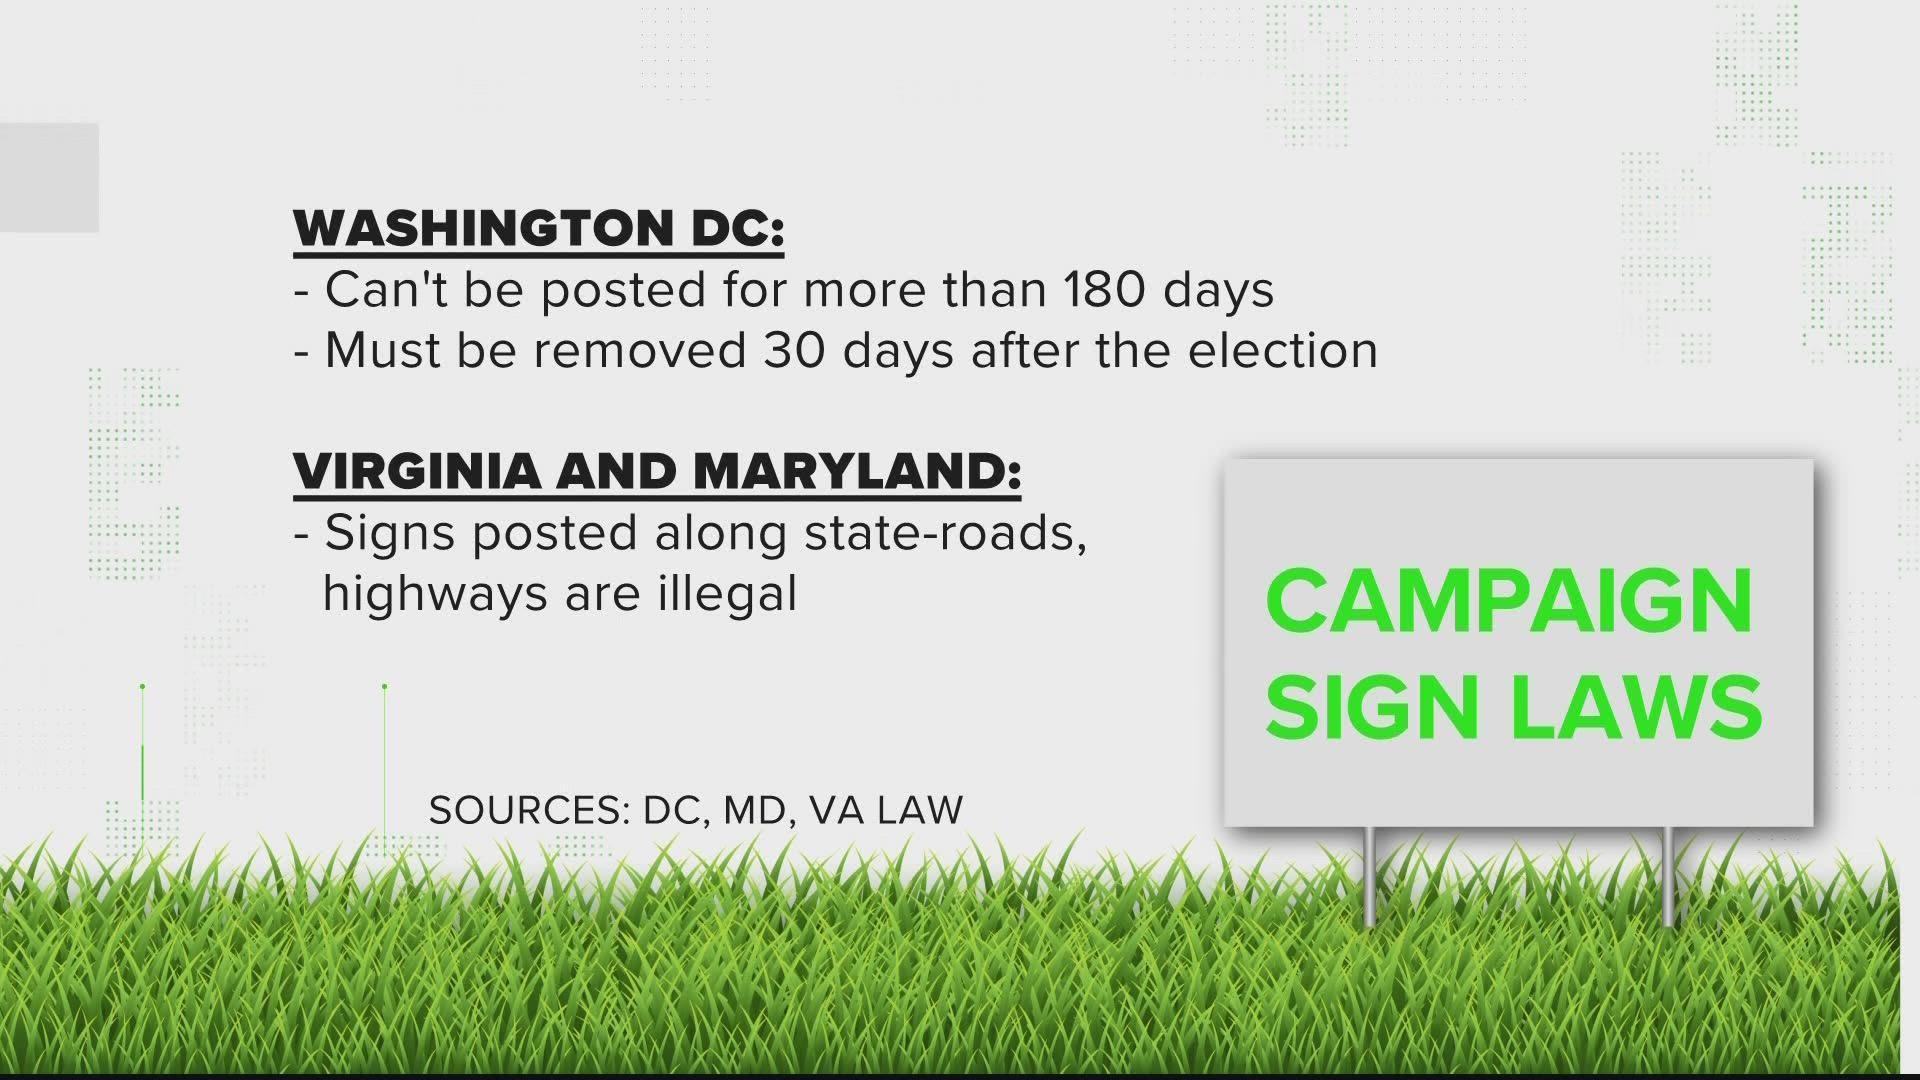 Rules on campaign signage vary by state.